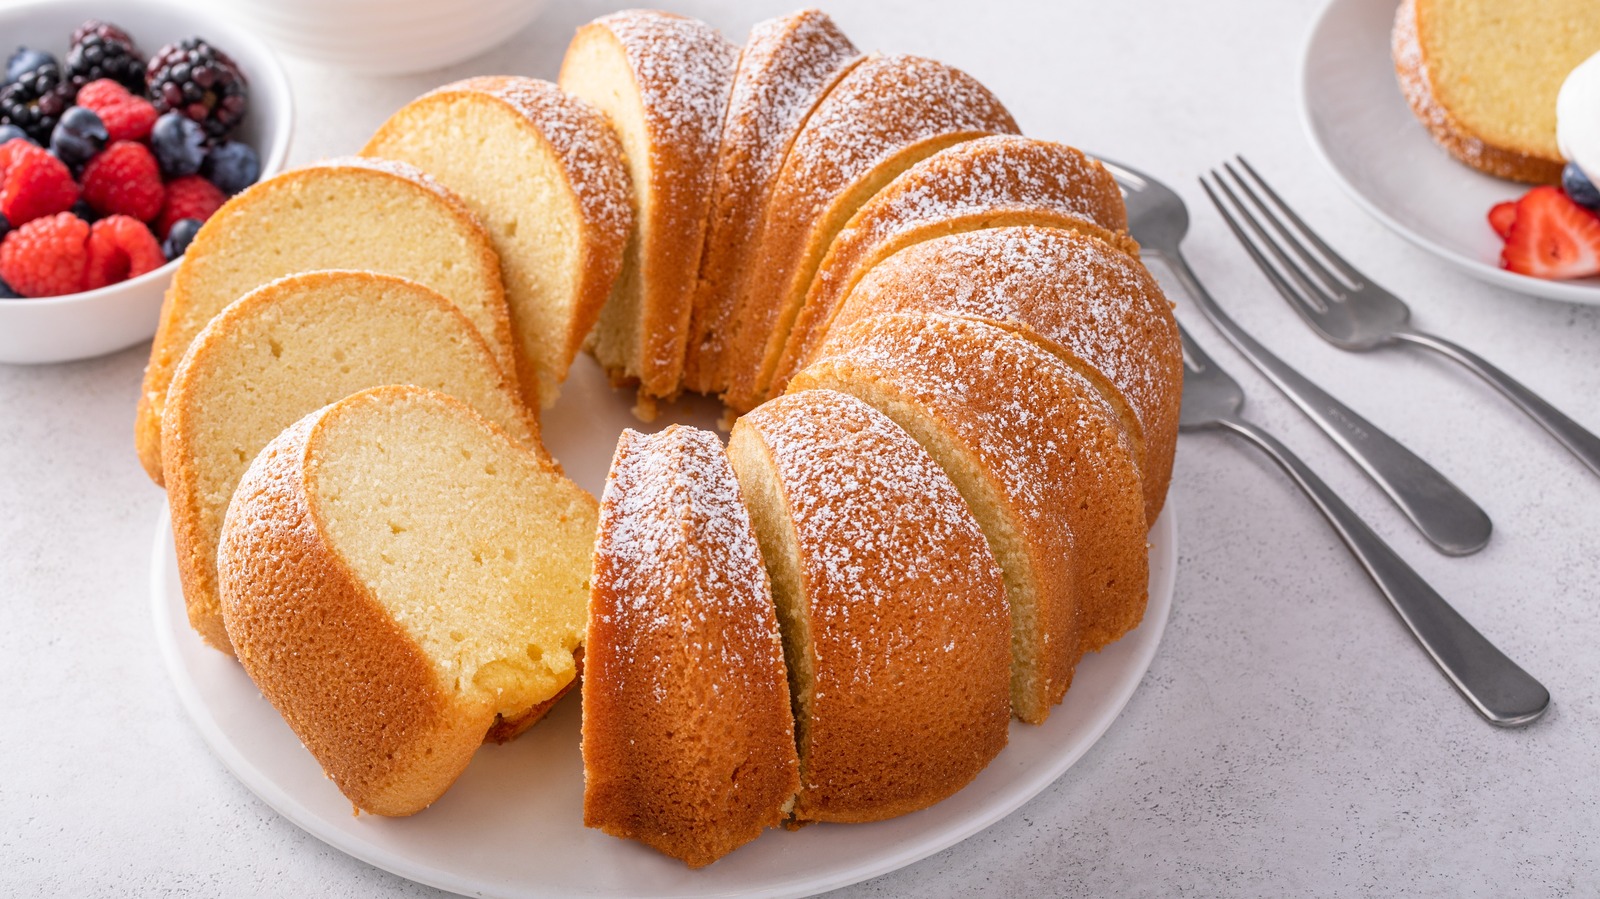 https://www.tastingtable.com/img/gallery/the-butter-alternative-to-grease-a-bundt-pan-if-your-cakes-stick/l-intro-1690406991.jpg